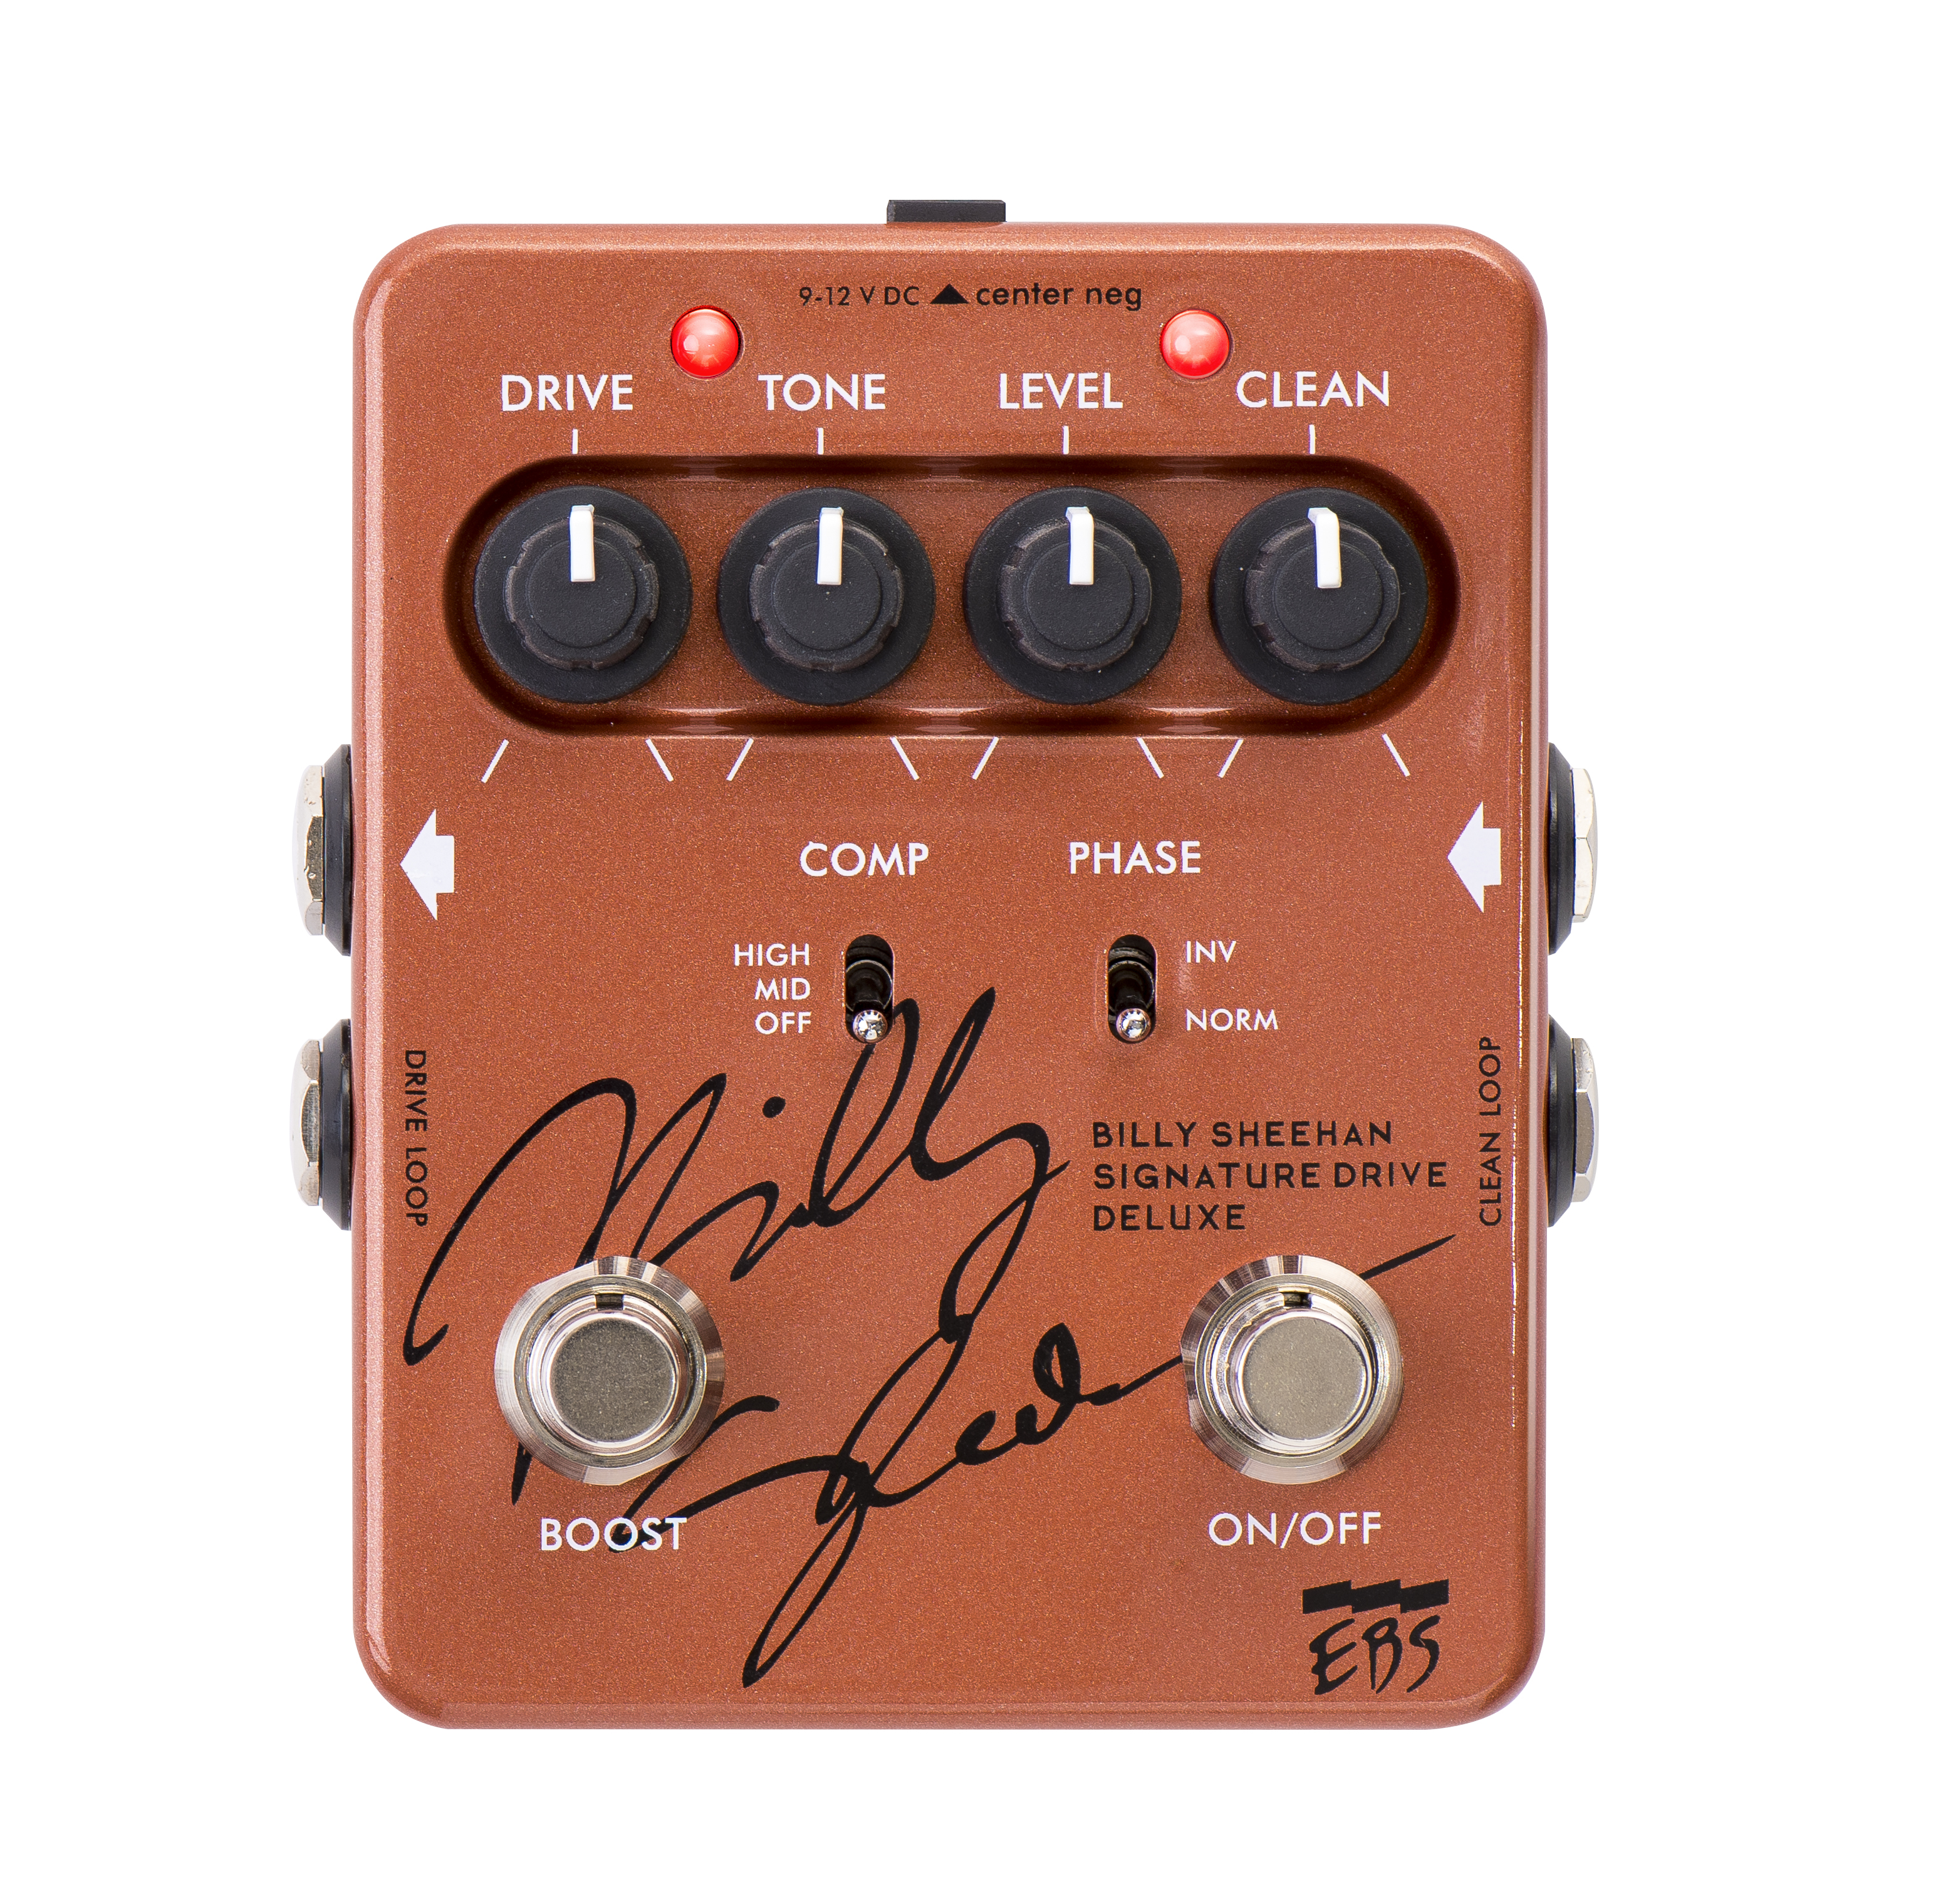 NEW: EBS Billy Sheehan Signature Drive Deluxe - EBS Professional